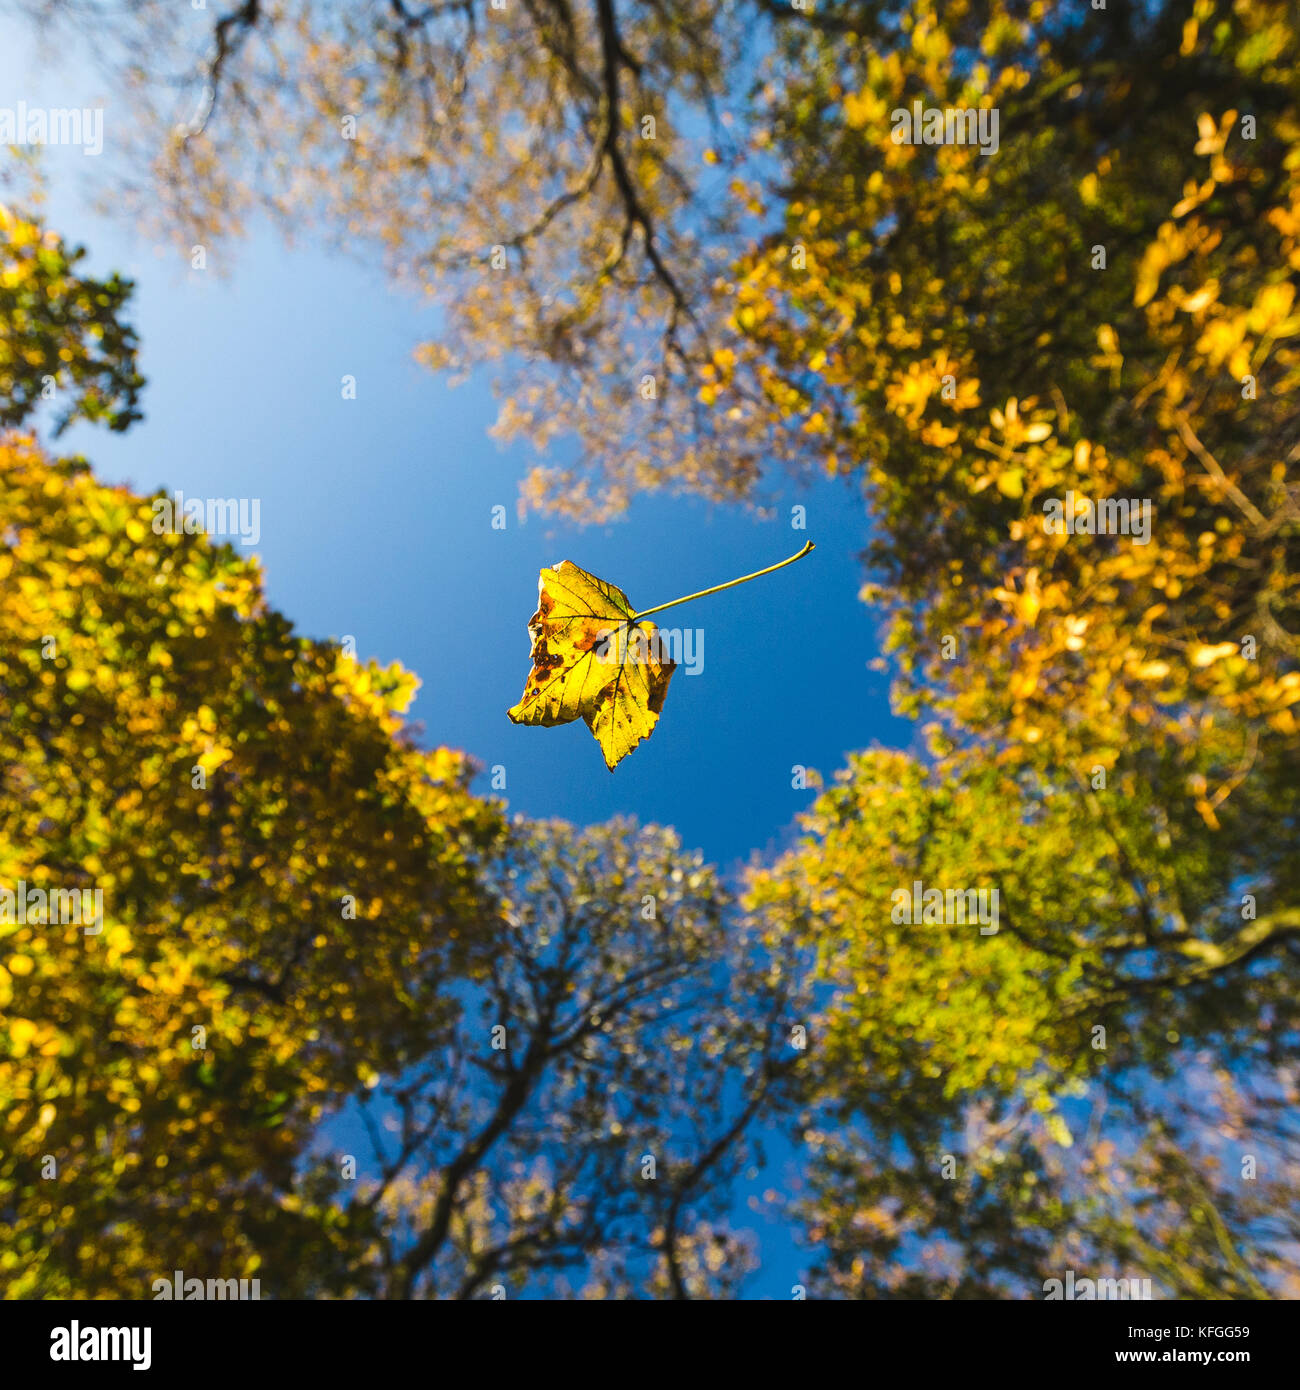 A leaf falls through the air under a canopy of Autumn trees. Stock Photo